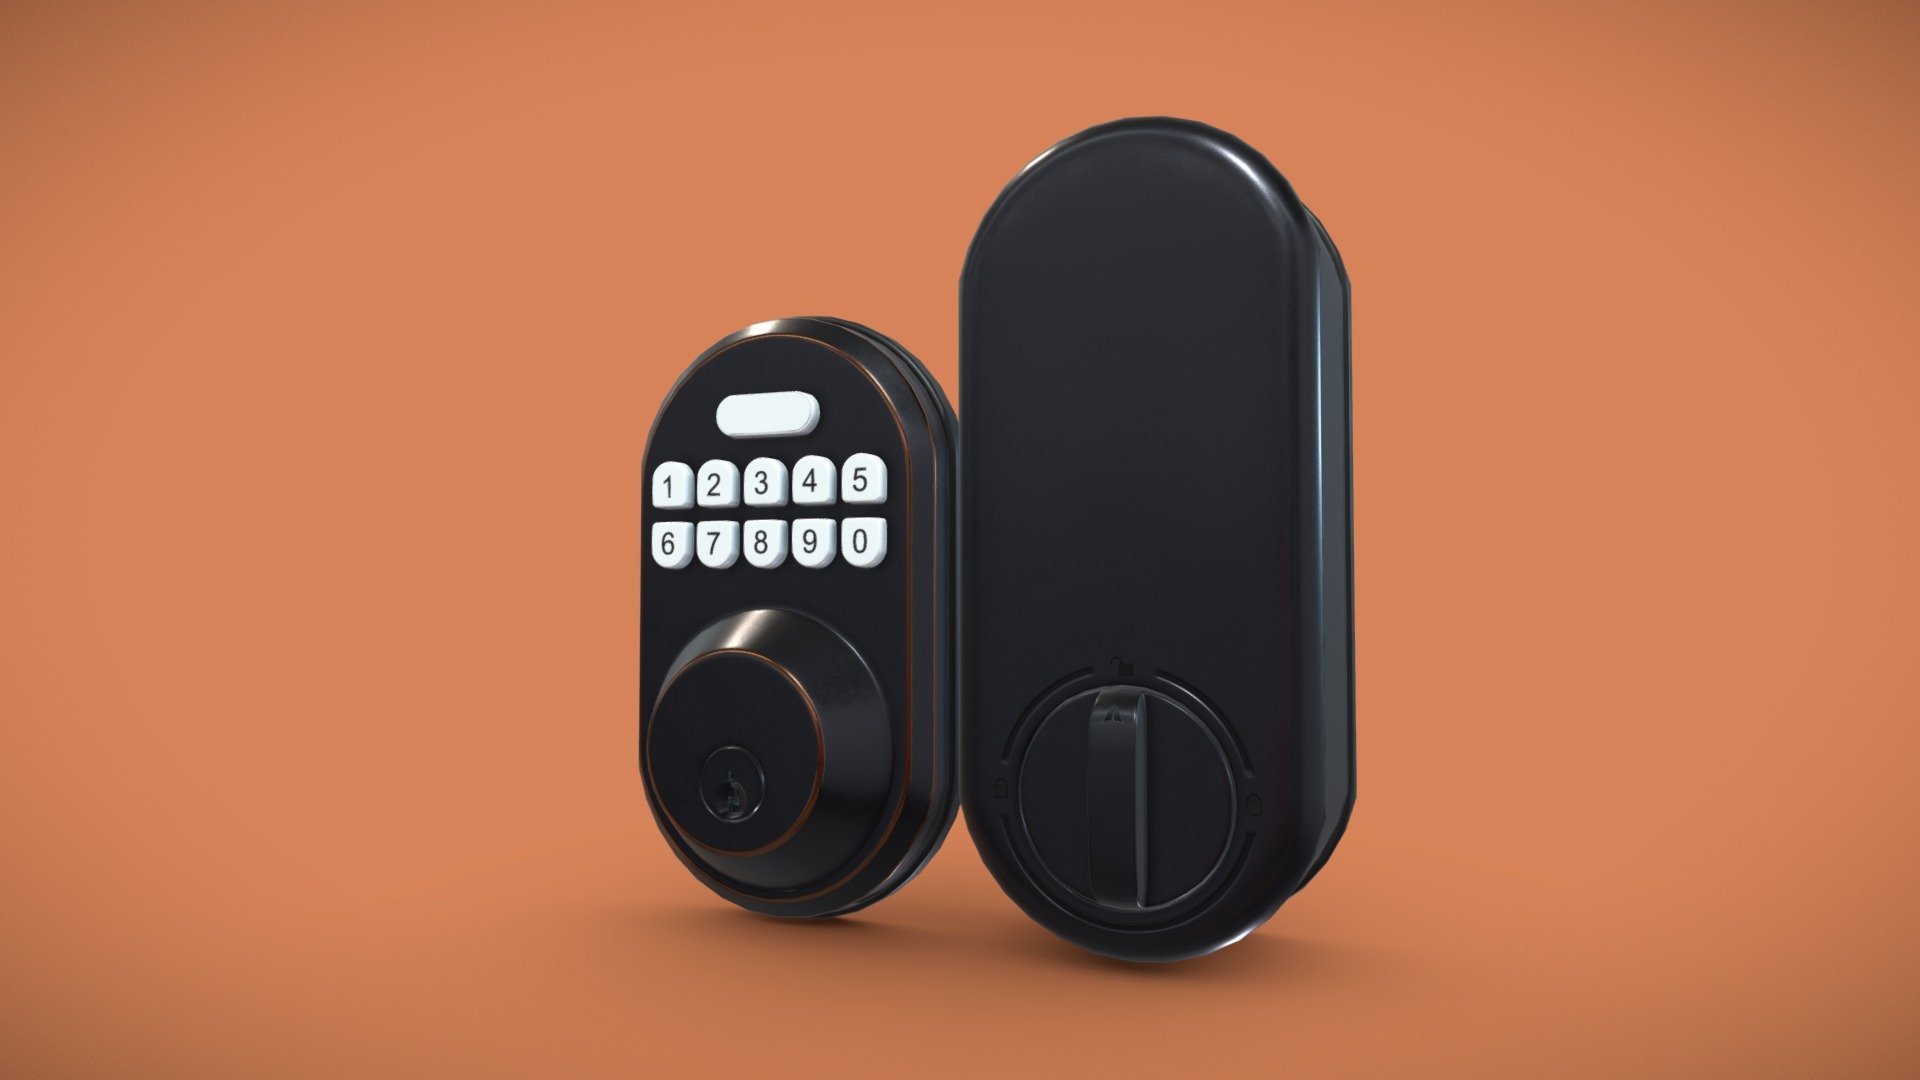 This is a 3D model of a Security Door Lock
- Made in Blender 2.9x (Cycles Materials) and Rendering Cycles.
- Main rendering made in Blender 2.9 + Cycles using some HDR Environment Textures Images for lighting which is NOT provided in the package!

What does this package include?
- 2K and 4K Textures (Base Color, Normal Map, Roughness, Ambient Occlusion) 

Important notes
- File format included - (Blend, FBX, OBJ, MTL, GLTF, PLY, ABC, DAE, STL)
- Texture size -  2K and 4K 
- Uvs non - overlapping
- Polygon: Quads
- Centered at 0,0,0
- In some formats may be needed to reassign textures and add HDR Environment Textures Images for lighting.
- Not lights include 
- Renders preview have not post processing
- No special plugin needed to open the scene.

If you like my work, please leave your comment and like, it helps me a lot to create new content.
If you have any questions or changes about colors or another thing, you can contact me at  we3domodel@gmail.com - Security Door Lock - Buy Royalty Free 3D model by We3Do (@giovanny) 3d model